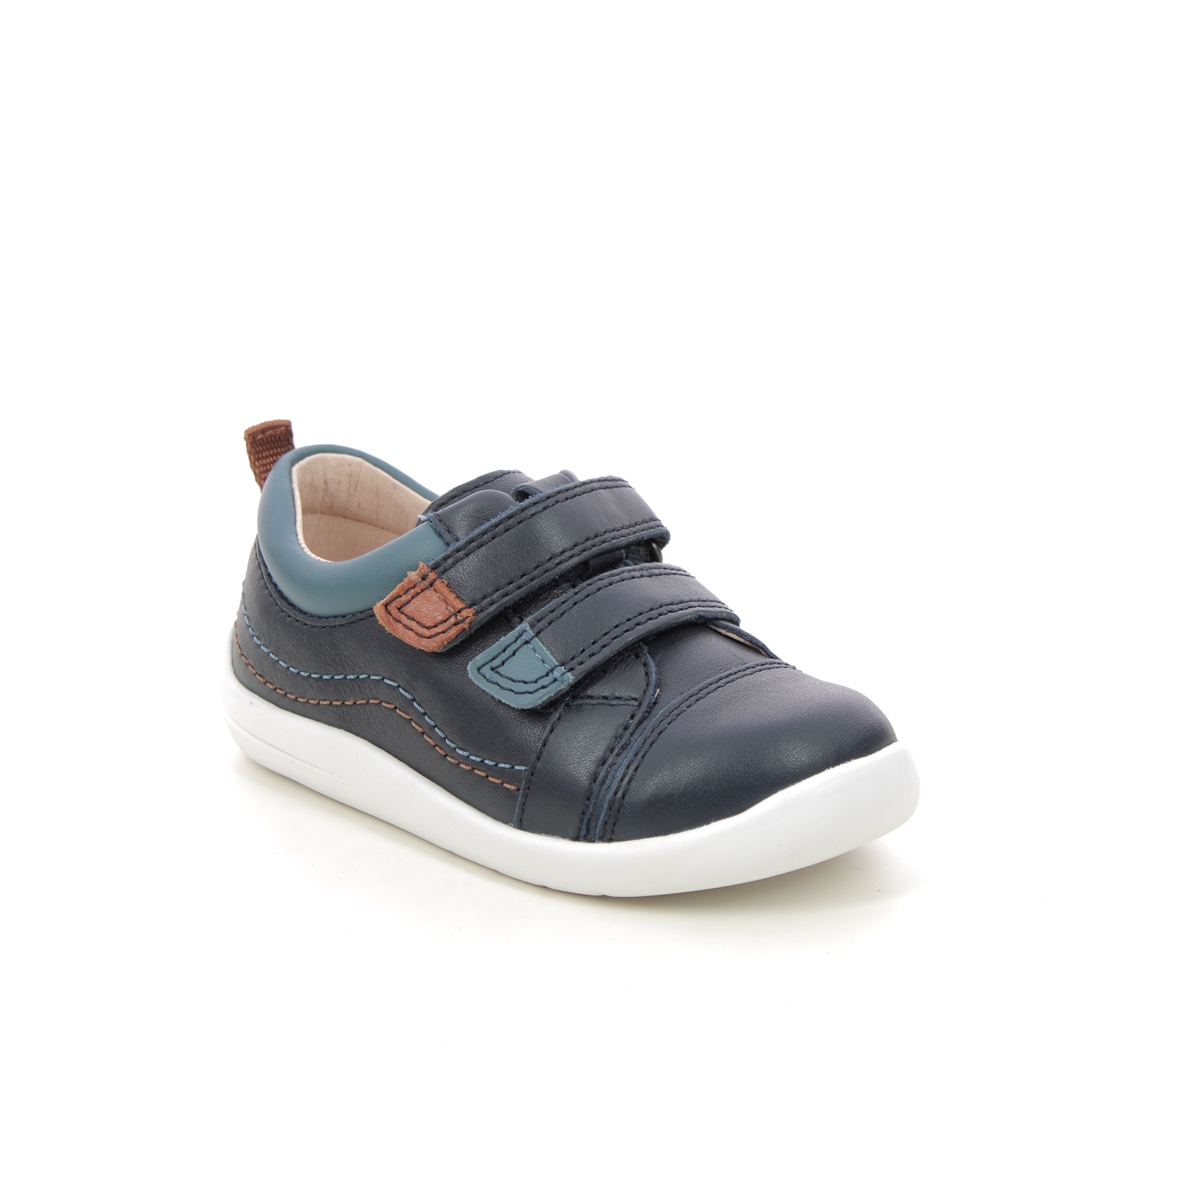 Start Rite - Clubhouse Jojo In Navy Leather 0800-96F In Size 7 In Plain Navy Leather Boys First And Toddler Shoes  In Navy Leather For kids